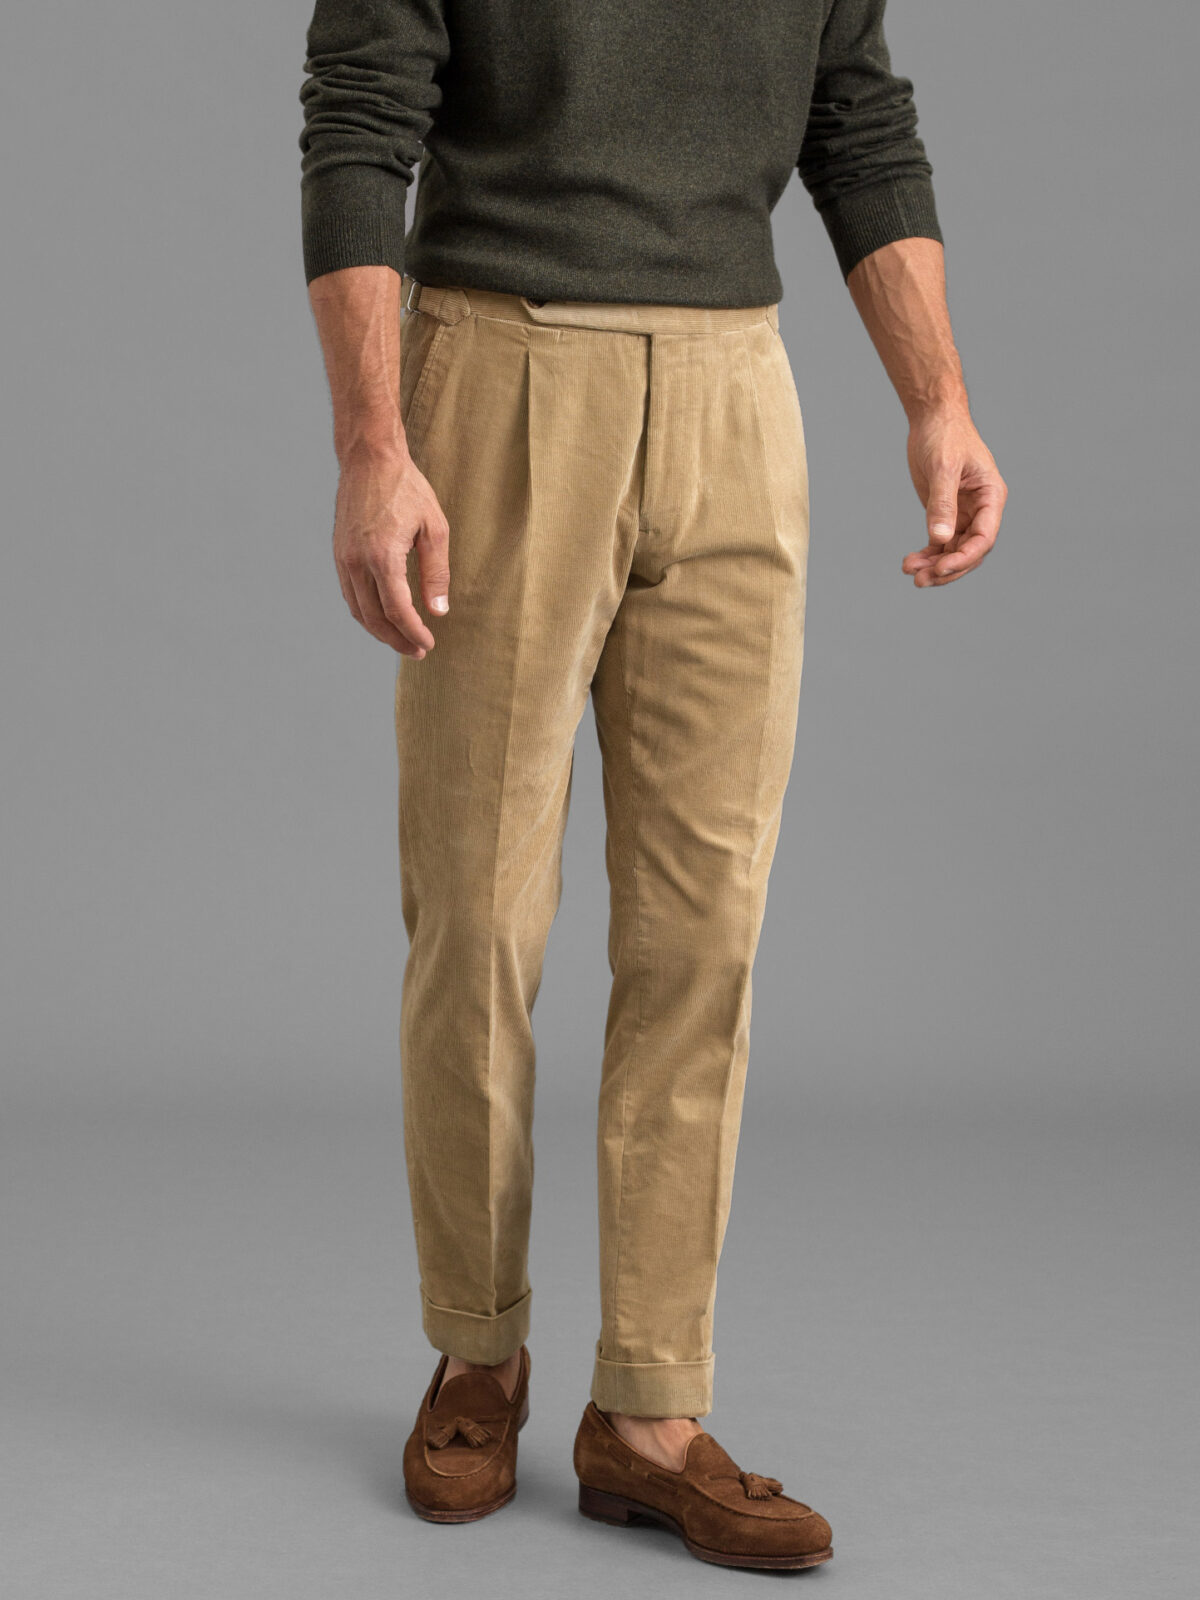 Pleated Beige Corduroy Stretch Dress Pant - Custom Fit Tailored